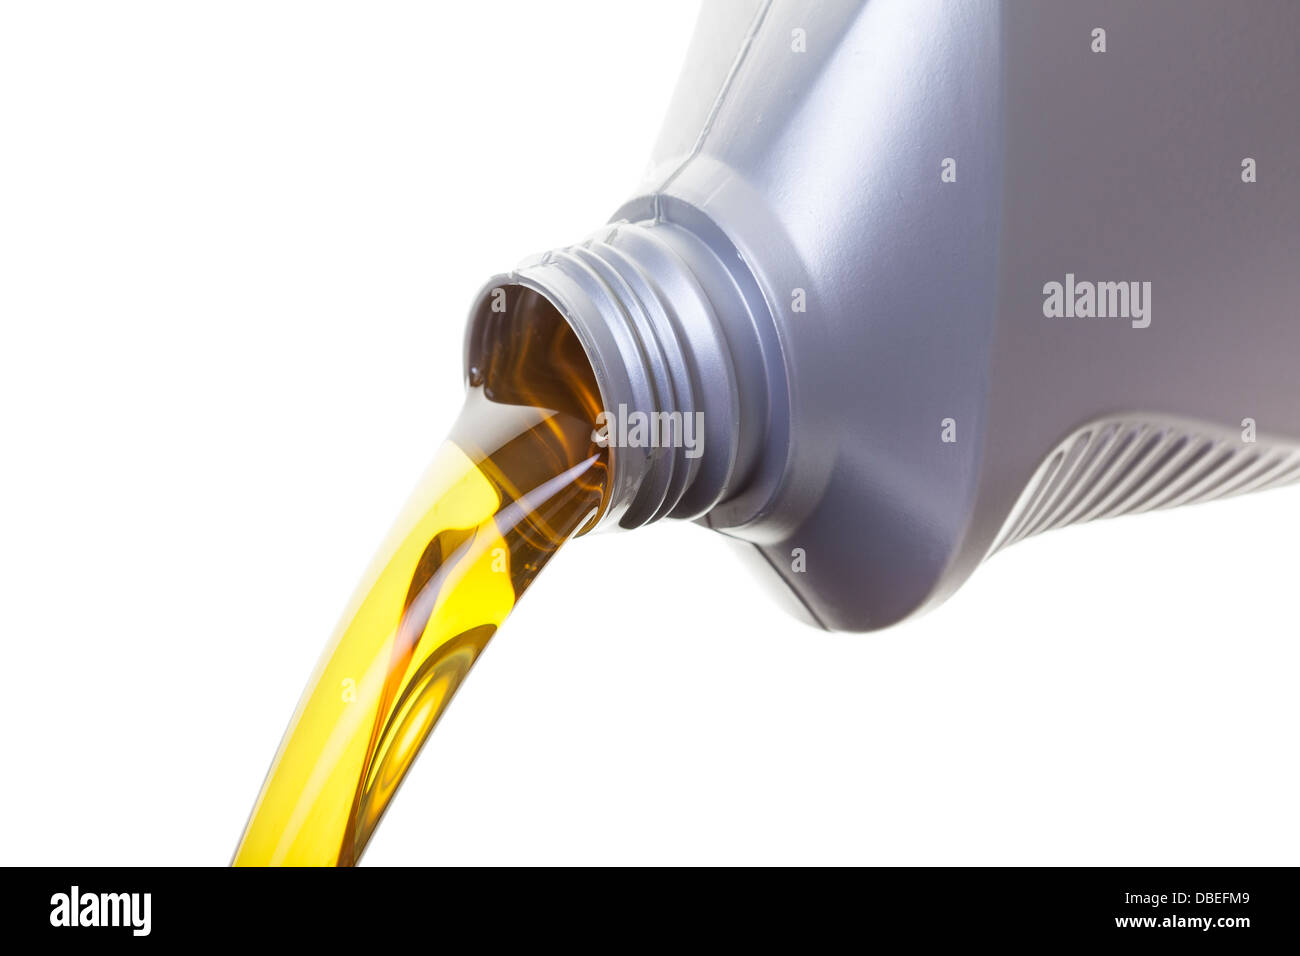 Pouring oil from a jug, shot on a whit background Stock Photo